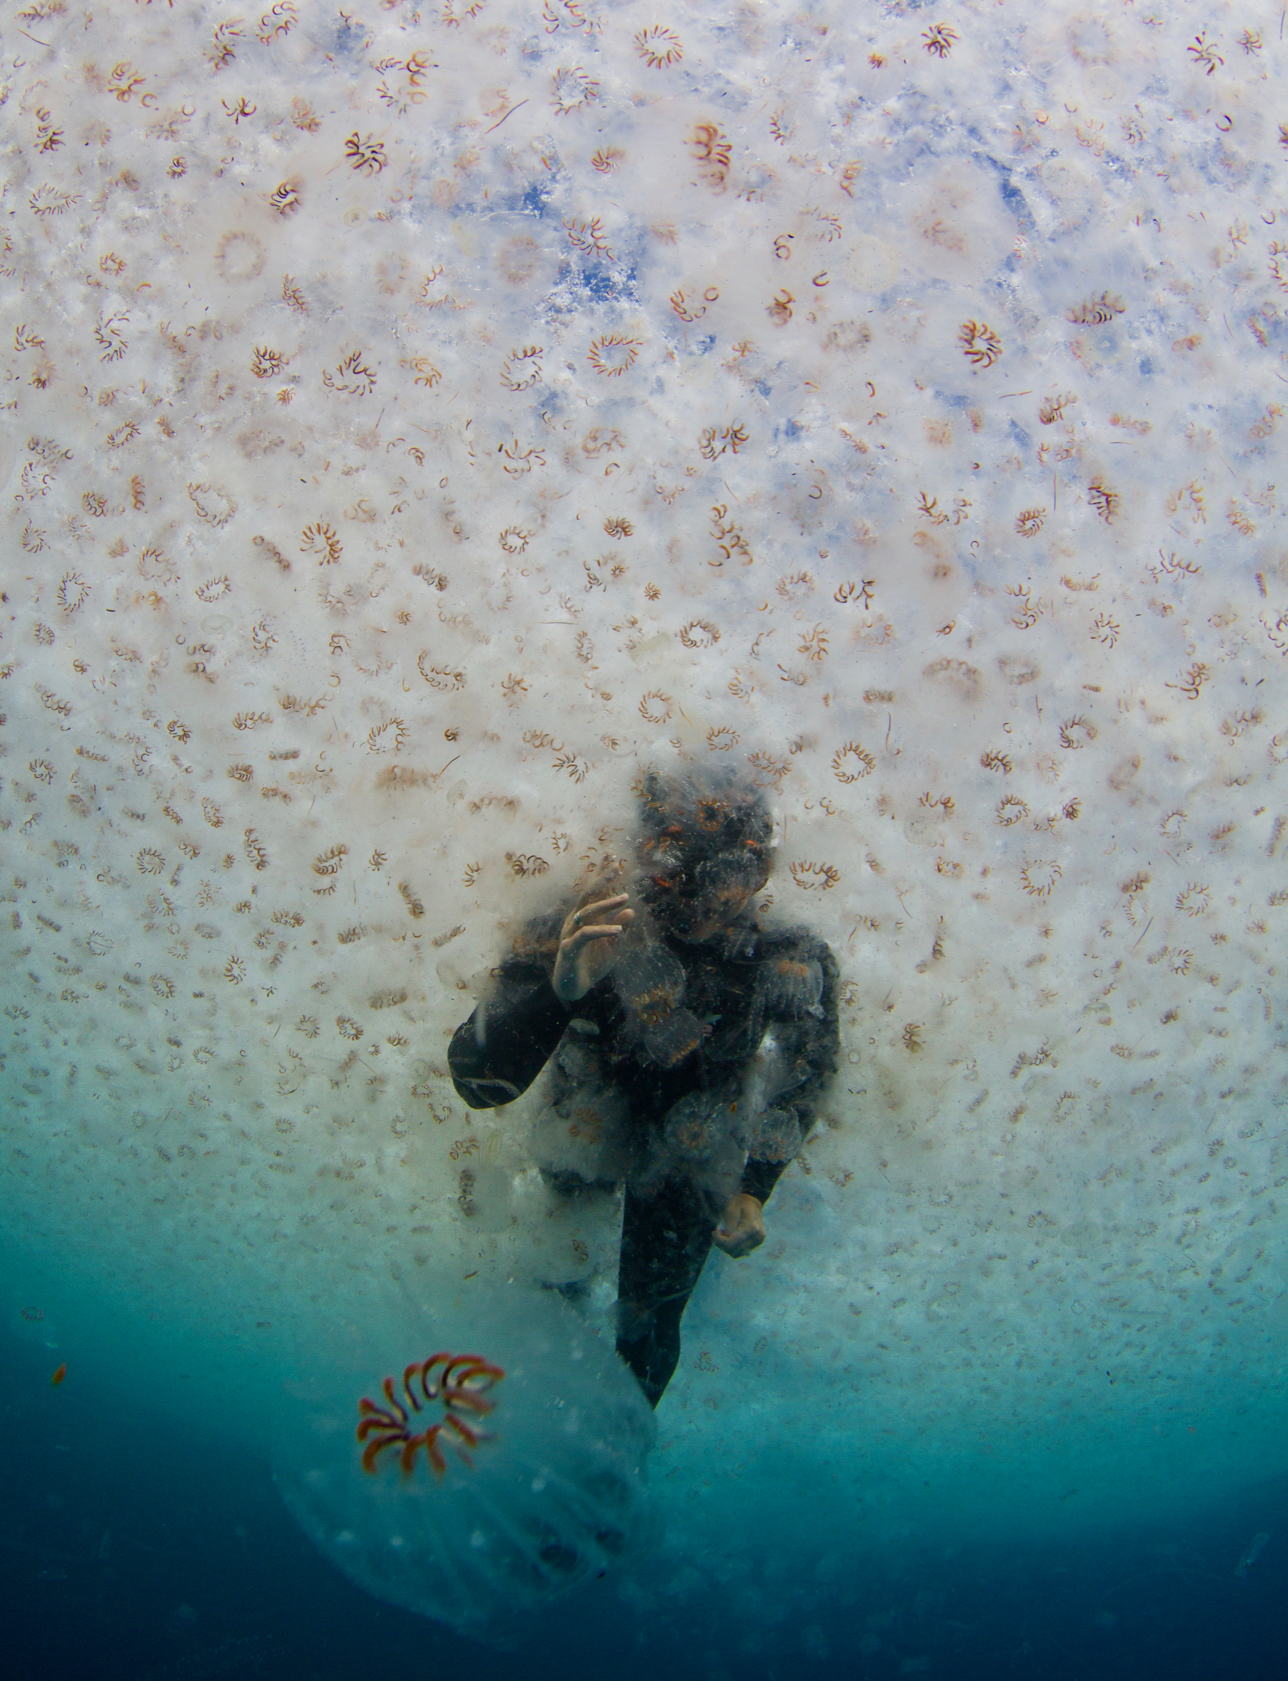 A snorkeler swims through a salp bloom off the coast of New Zealand. Salps resemble jellyfish but are more closely related to humans. VIMS-led research reveals they play an outsized role in the ocean’s biological carbon pump. Credit: Paul Caiger. © CC BY NC ND.